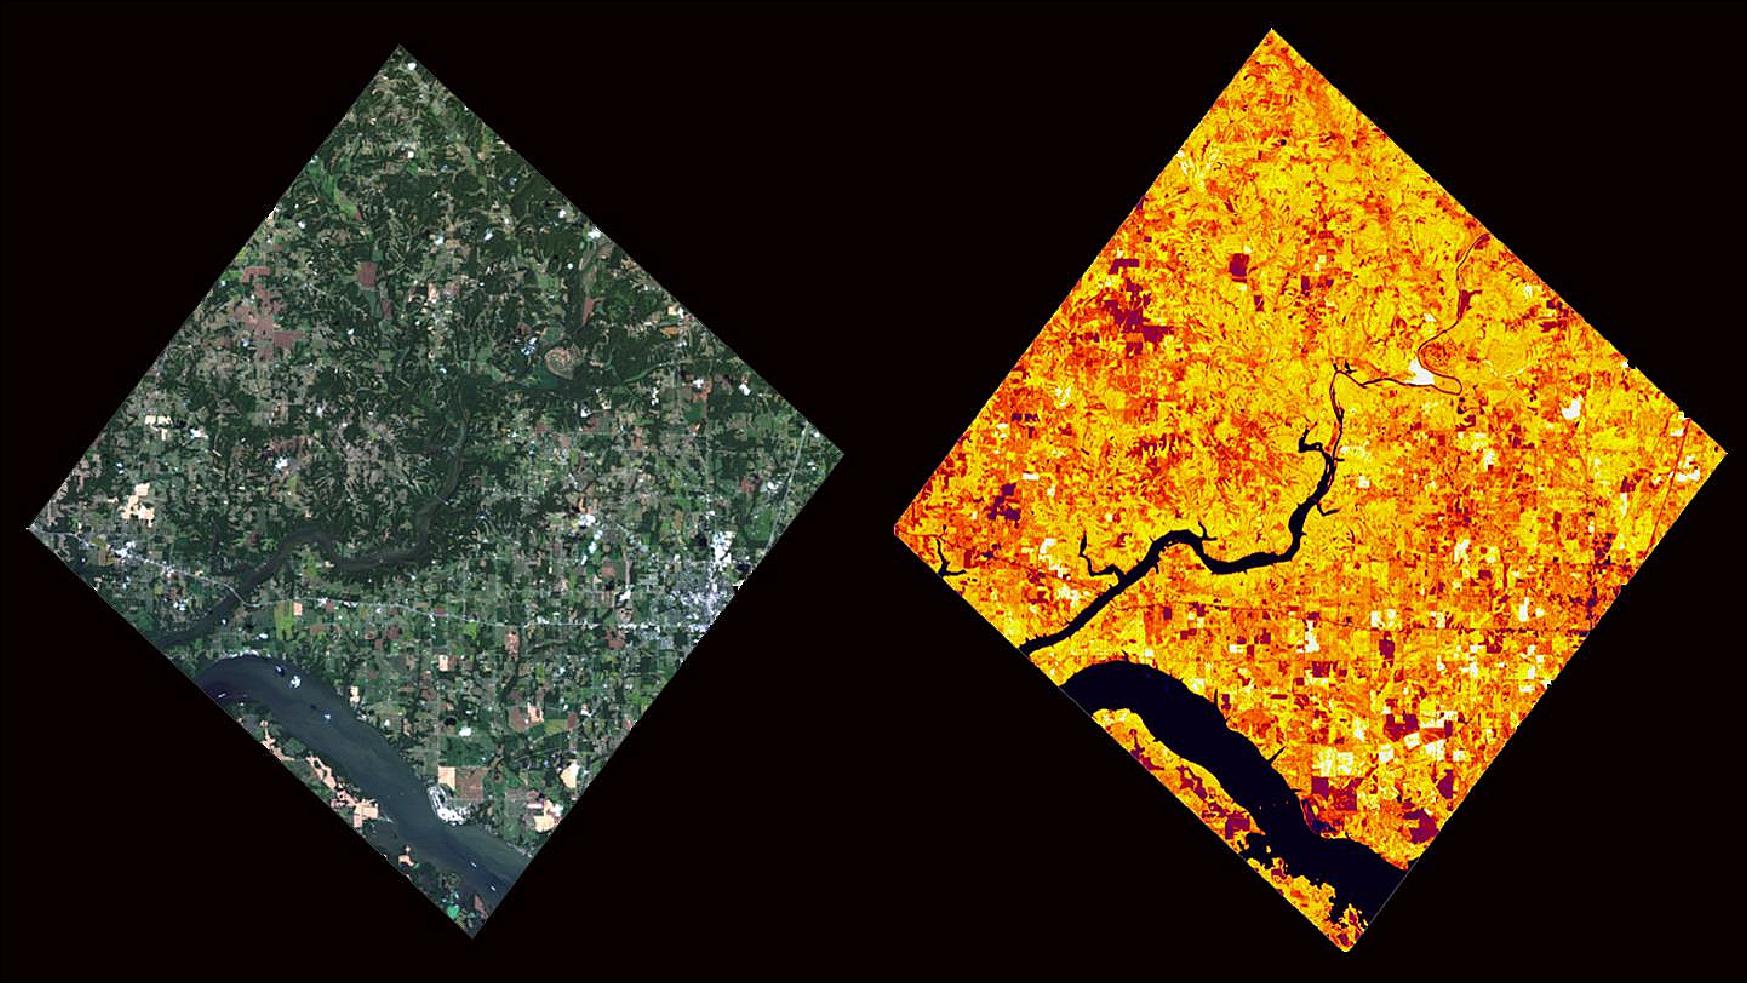 Figure 23: First images of the hyperspectral instrument DESIS. Left: Optical image of the environment of Huntsville, AL; Right: A processed image showing the vegetation density (image credit: DLR)